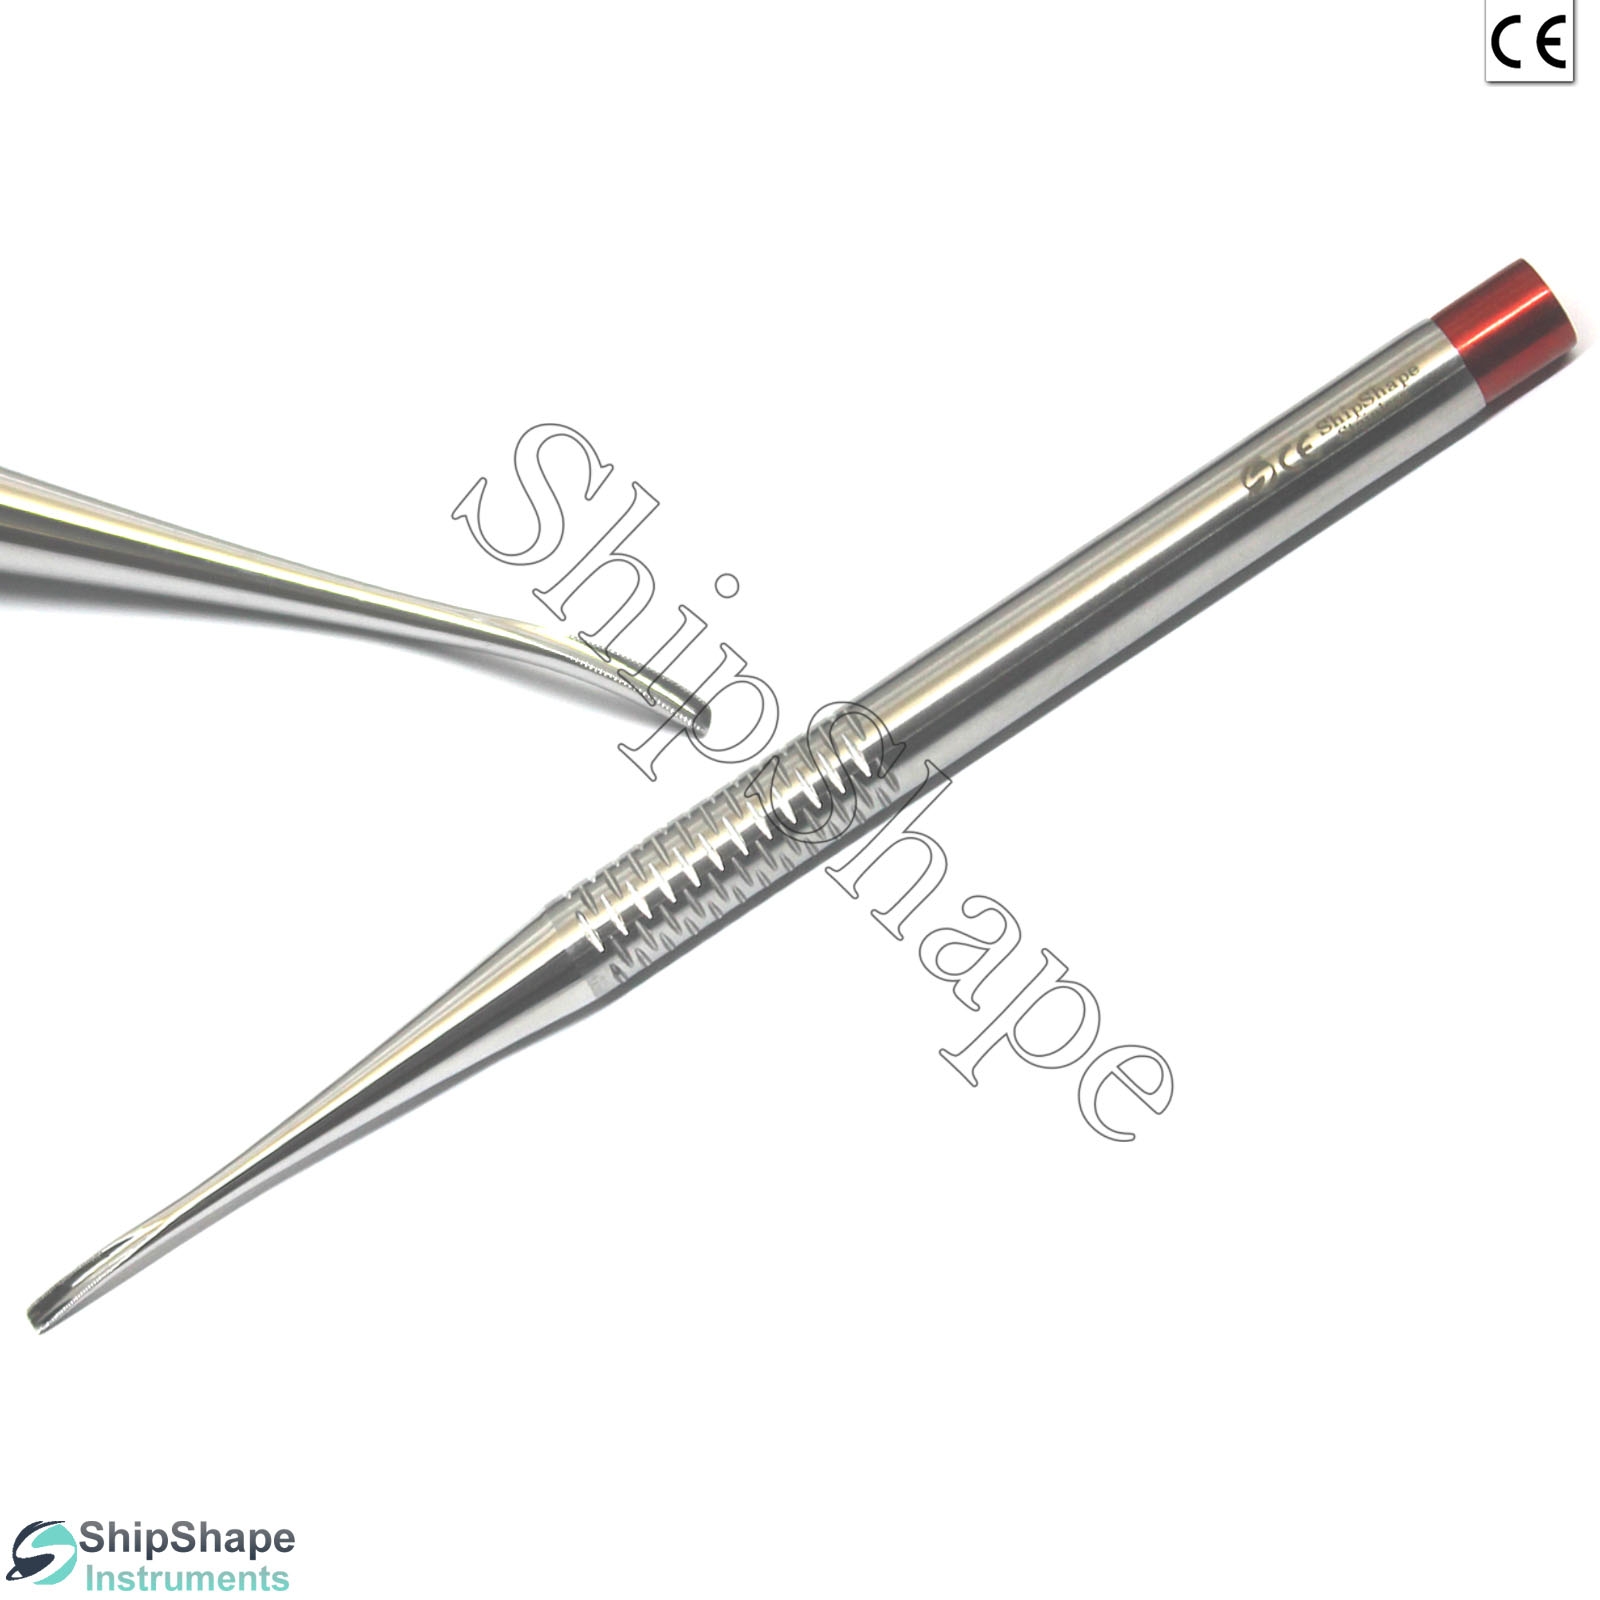 PDL Luxating Implant Root Elevators / Proximetters Surgical Precise Dental Instruments-1328